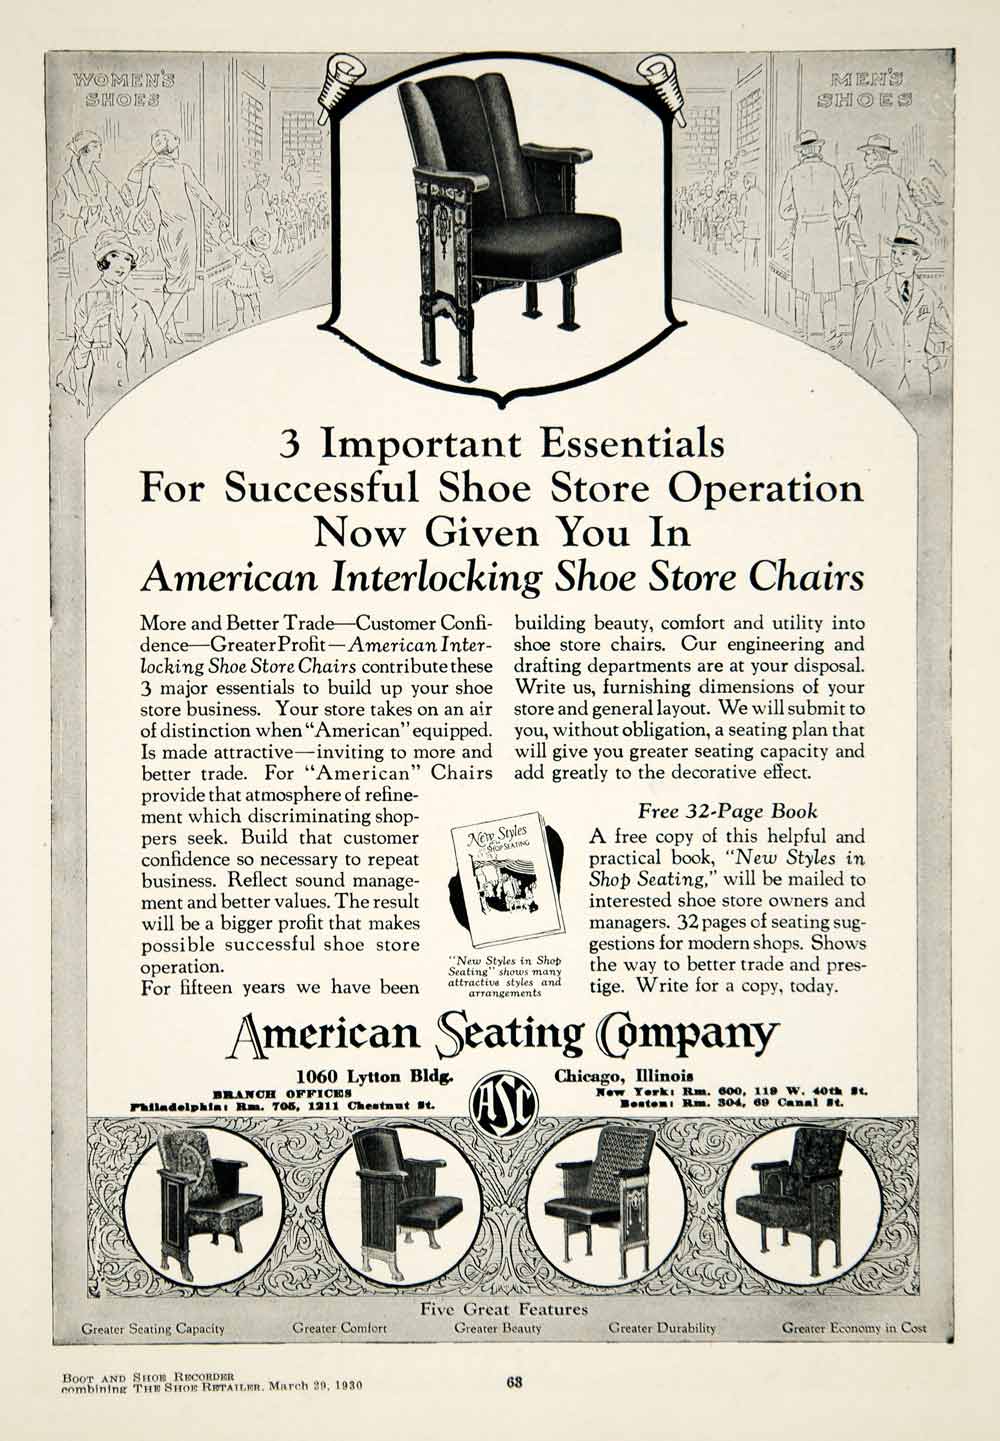 1930 Ad American Seating Company Shoe Store Chairs Chicago Illinois YBSR1